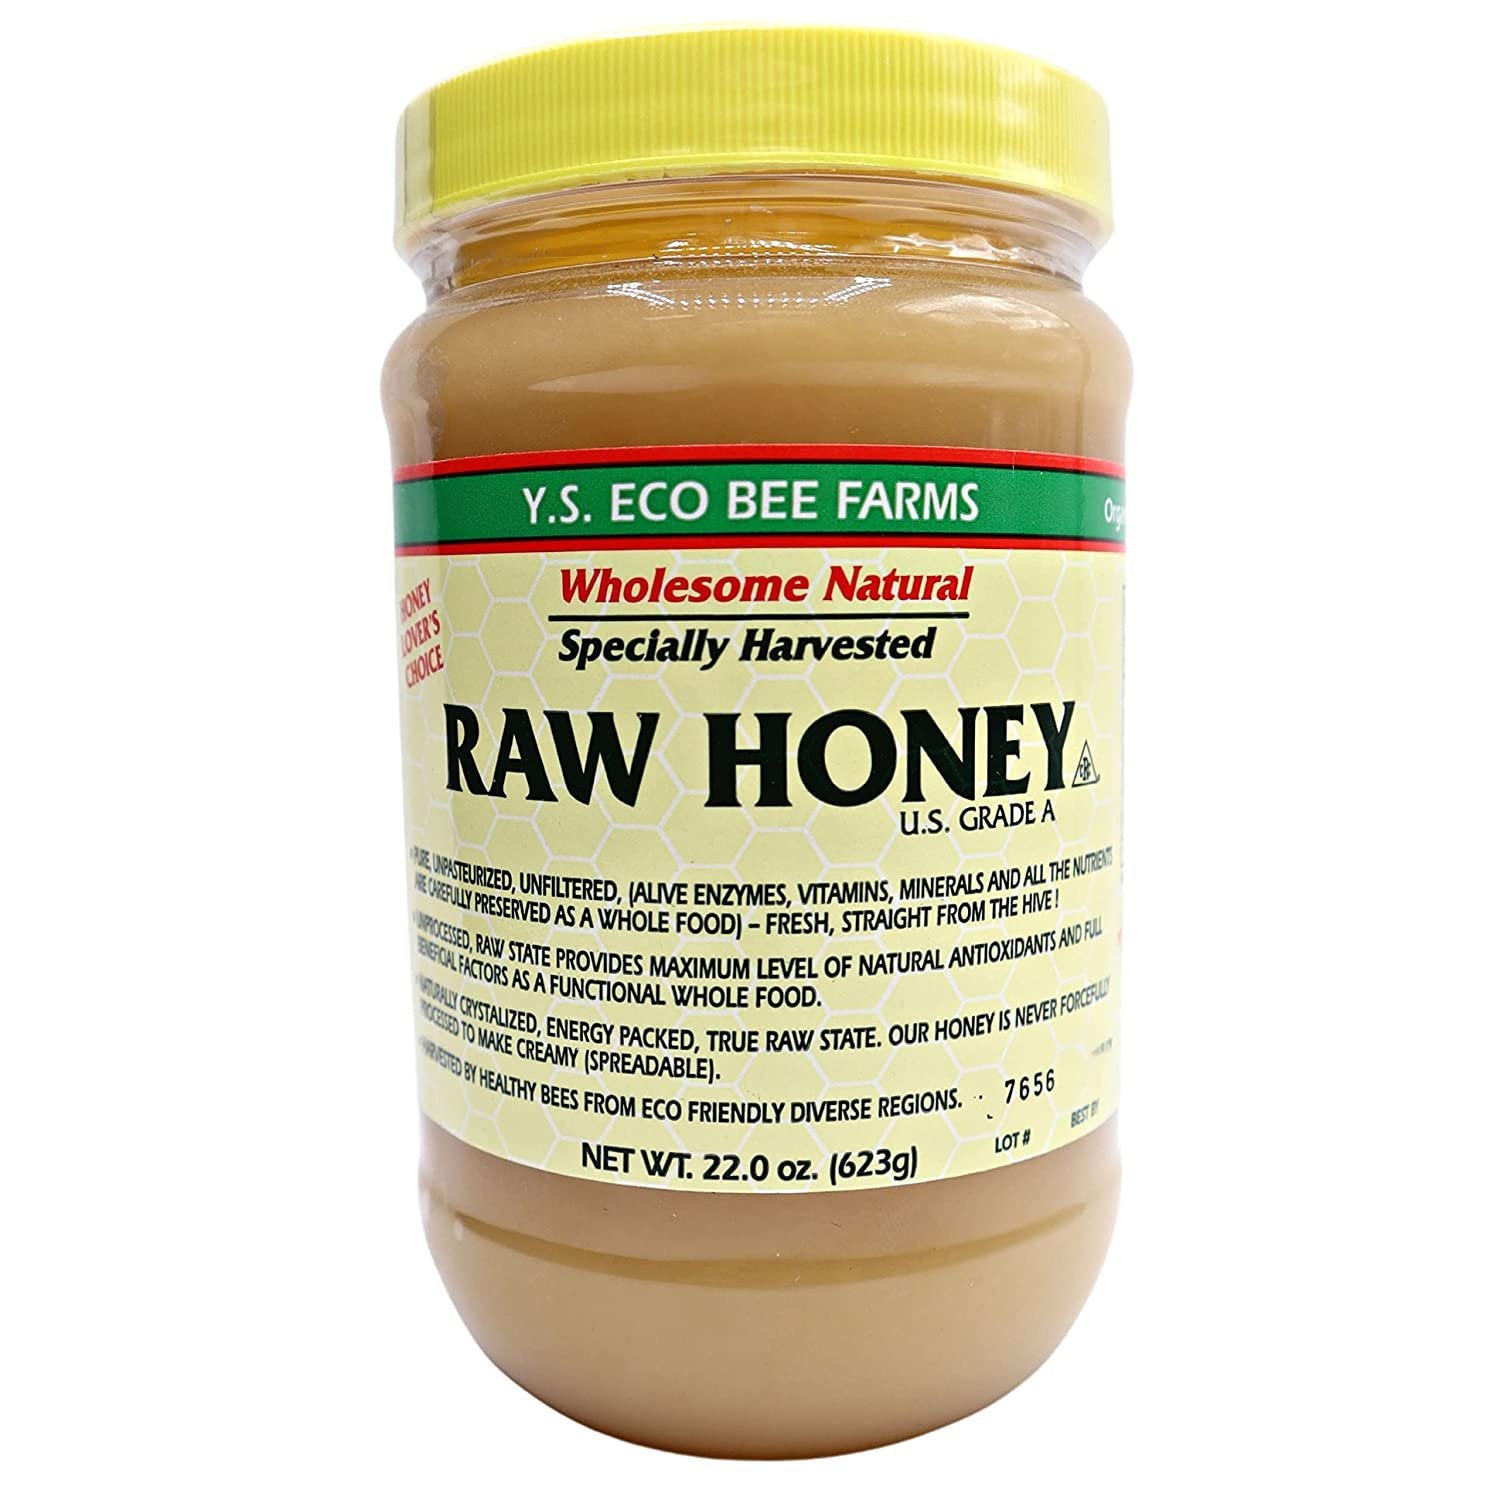 Y.S. Eco Bee Farms, Y.S. Organic Bee Farms, Wholesome Natural Raw Honey, Unpasteurized, Unfiltered, Fresh Raw State, Kosher, Pure, Natural, Healthy, Safe, Gluten Free, Specially Harvested, 22oz